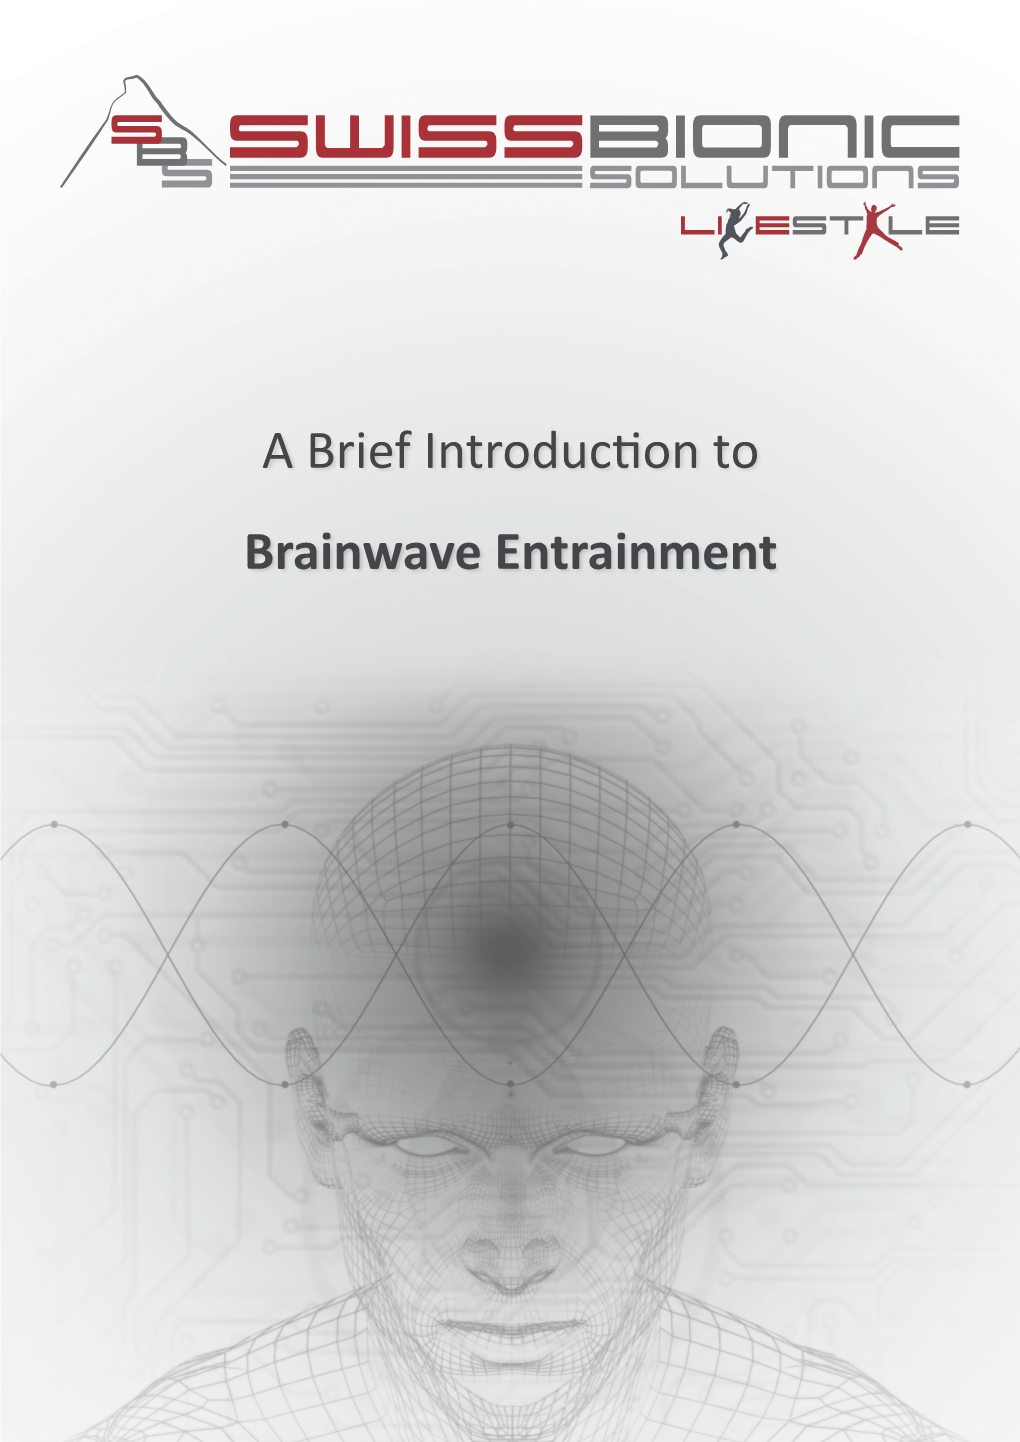 Brainwave Entrainment Brainwave Entrainment Was First Identified in 1934, Although Its Effects Had Been Noted As Early As Ptolemy